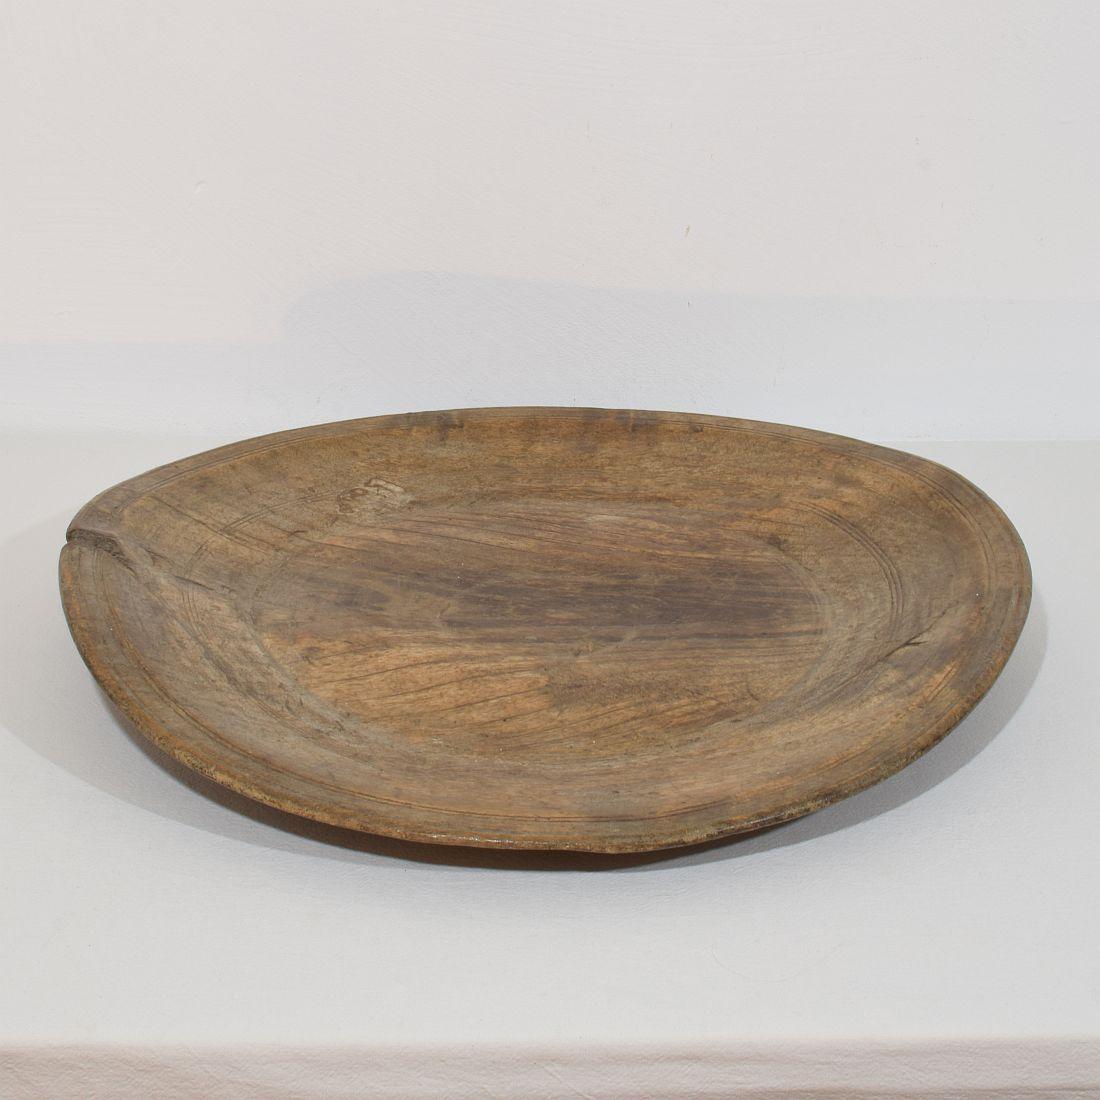 French Provincial Large 18th Century French Wooden Bowl / Platter For Sale